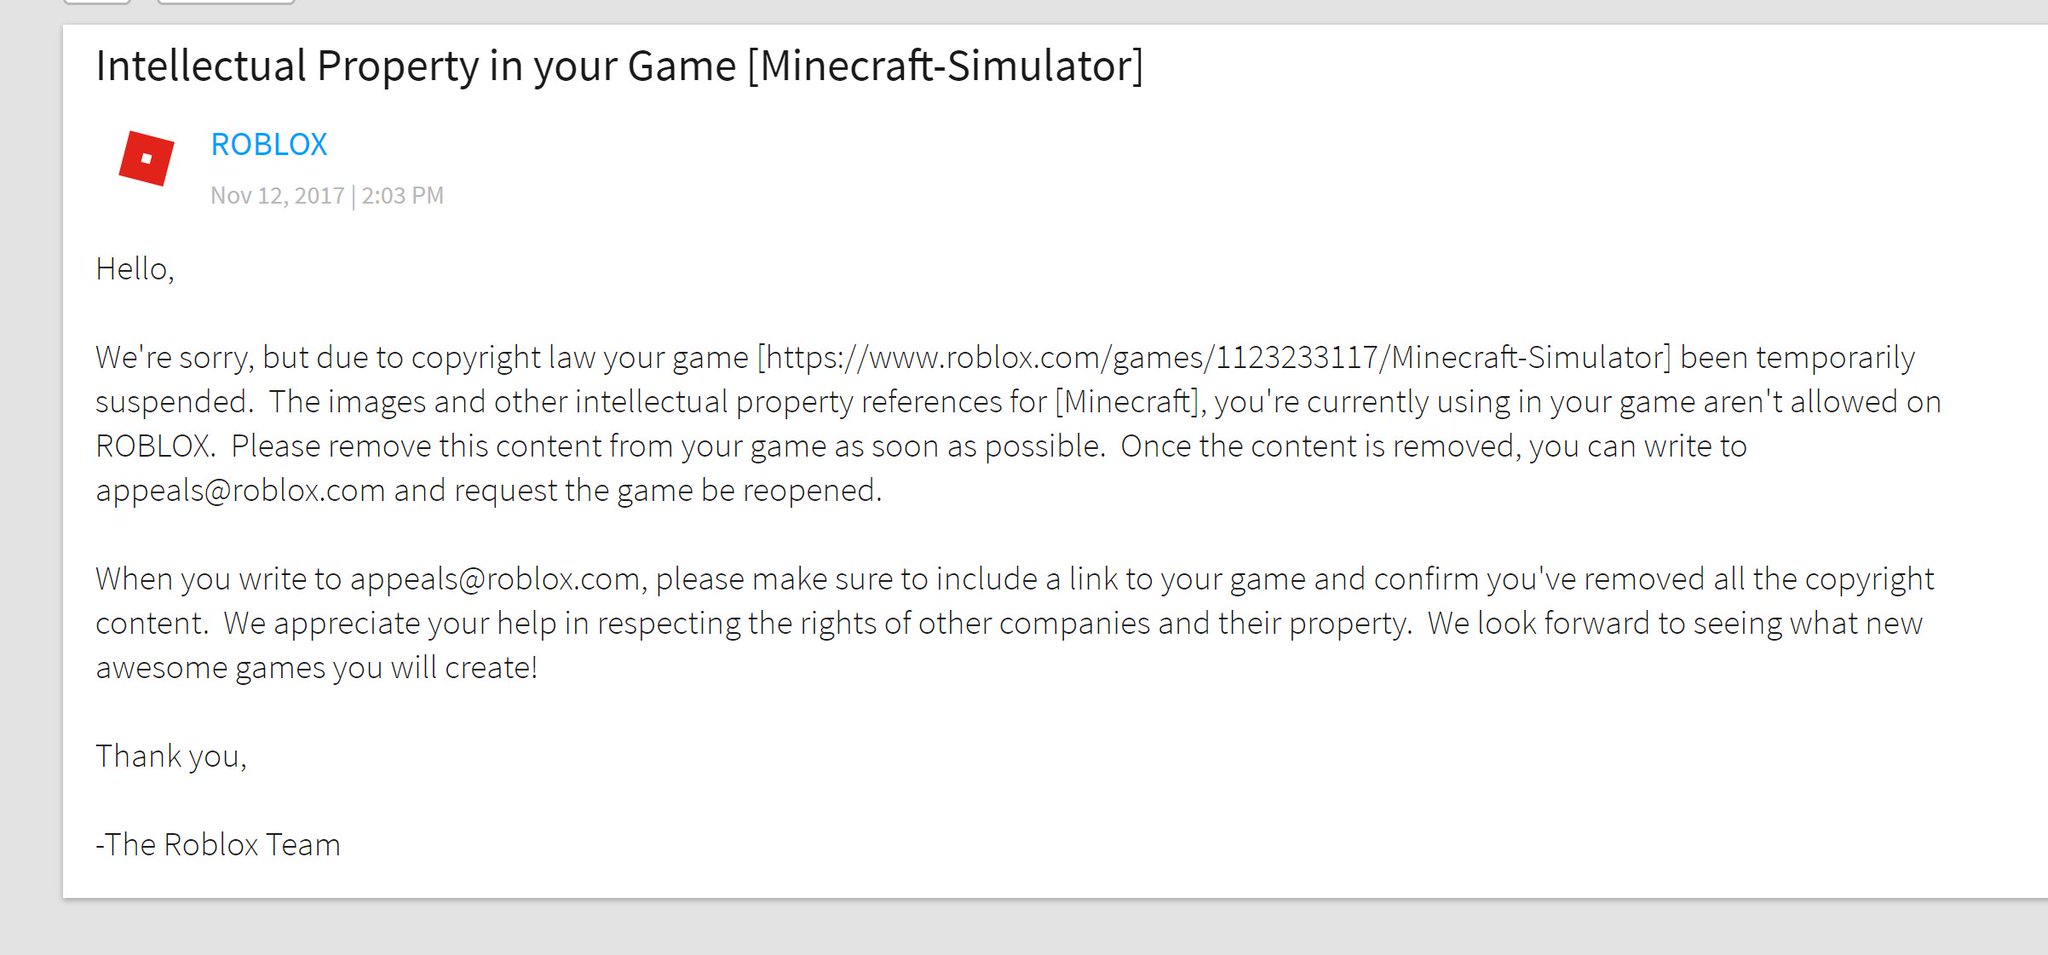 Rainway On Twitter It S Funny How Other Games Like Pokemon Brick Bronze And Cb Ro Can Get Away With Copyright But When It Comes To Roblox S Direct Competitor Minecraft They Ll Instantly Take It - are roblox games copyrighted